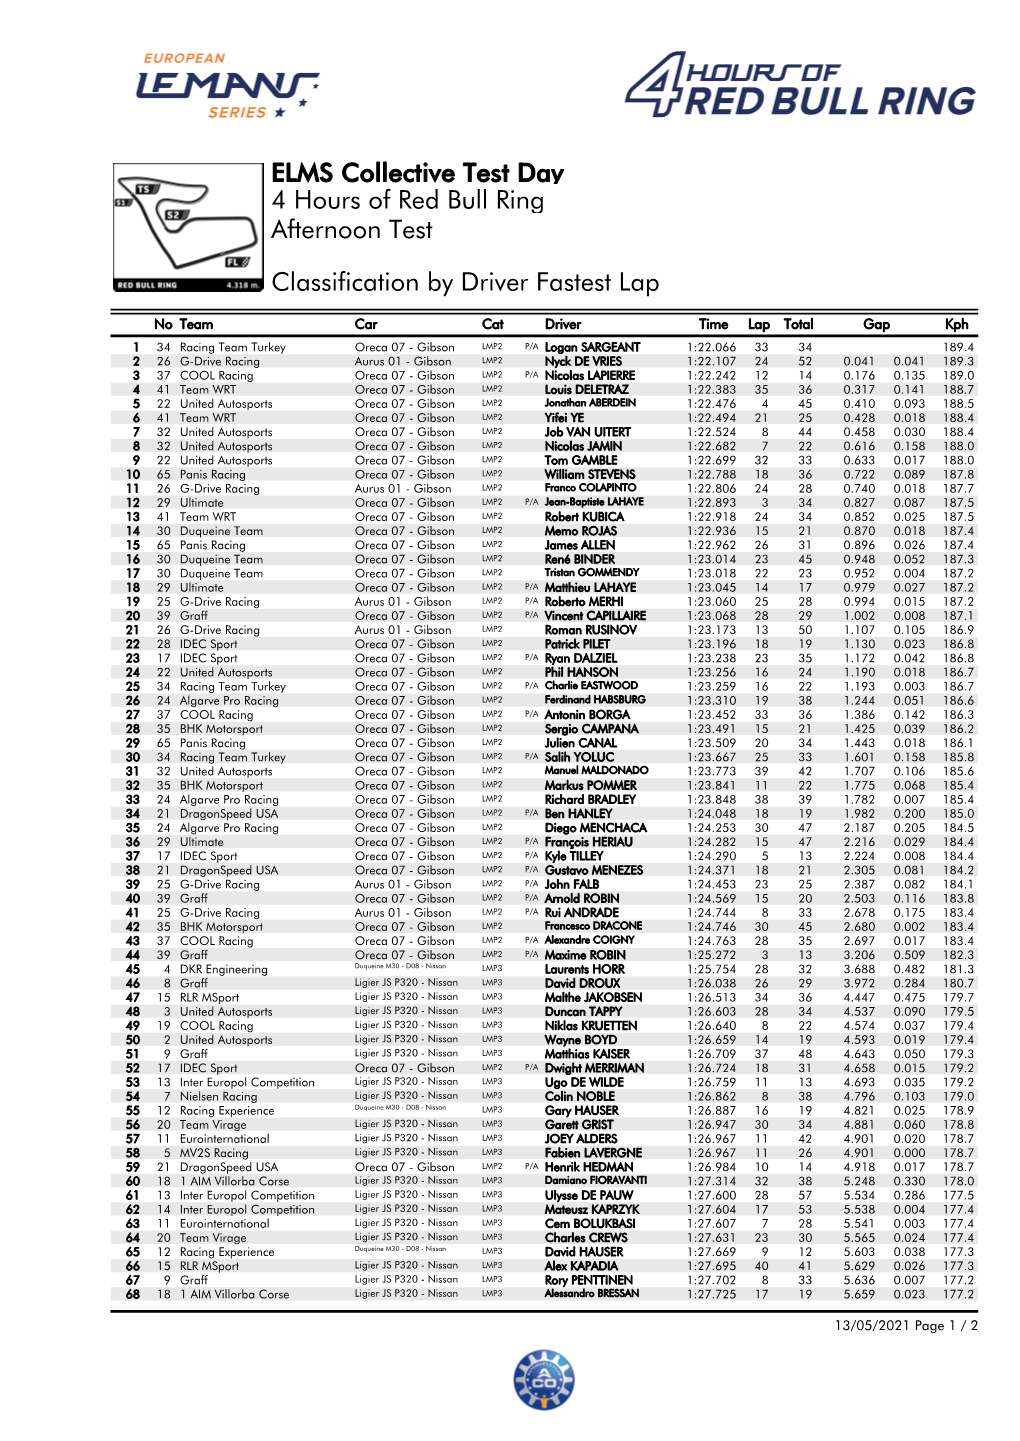 Classification by Driver Fastest Lap Afternoon Test 4 Hours of Red Bull